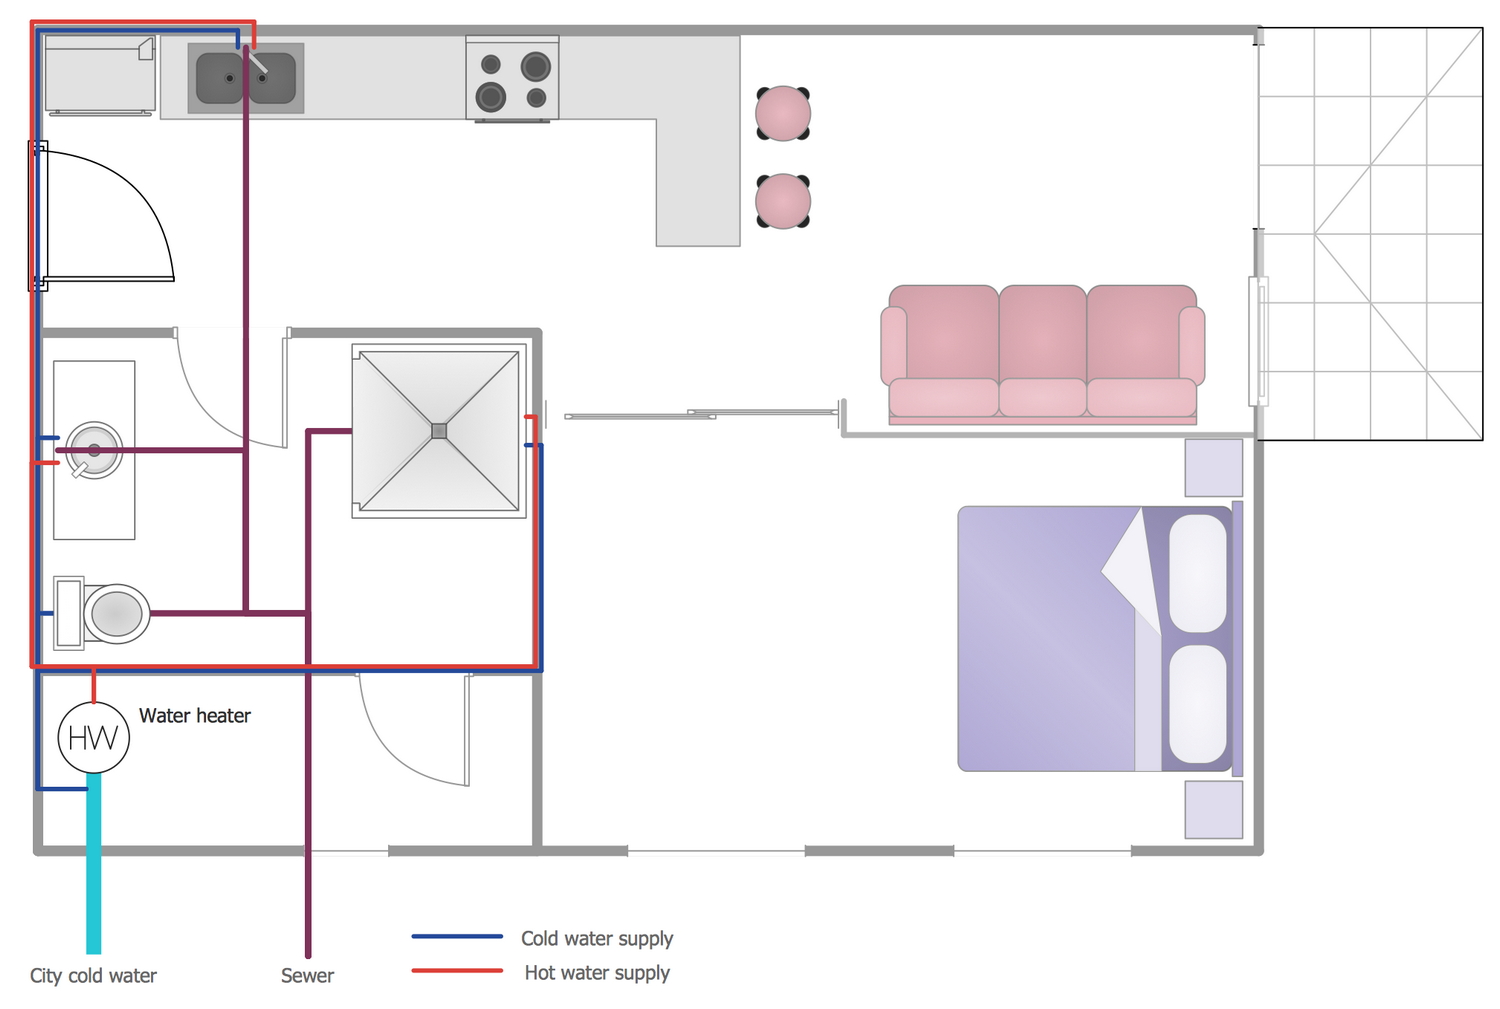 Plumbing and Piping Plans Solution | ConceptDraw.com spa heating diagram 